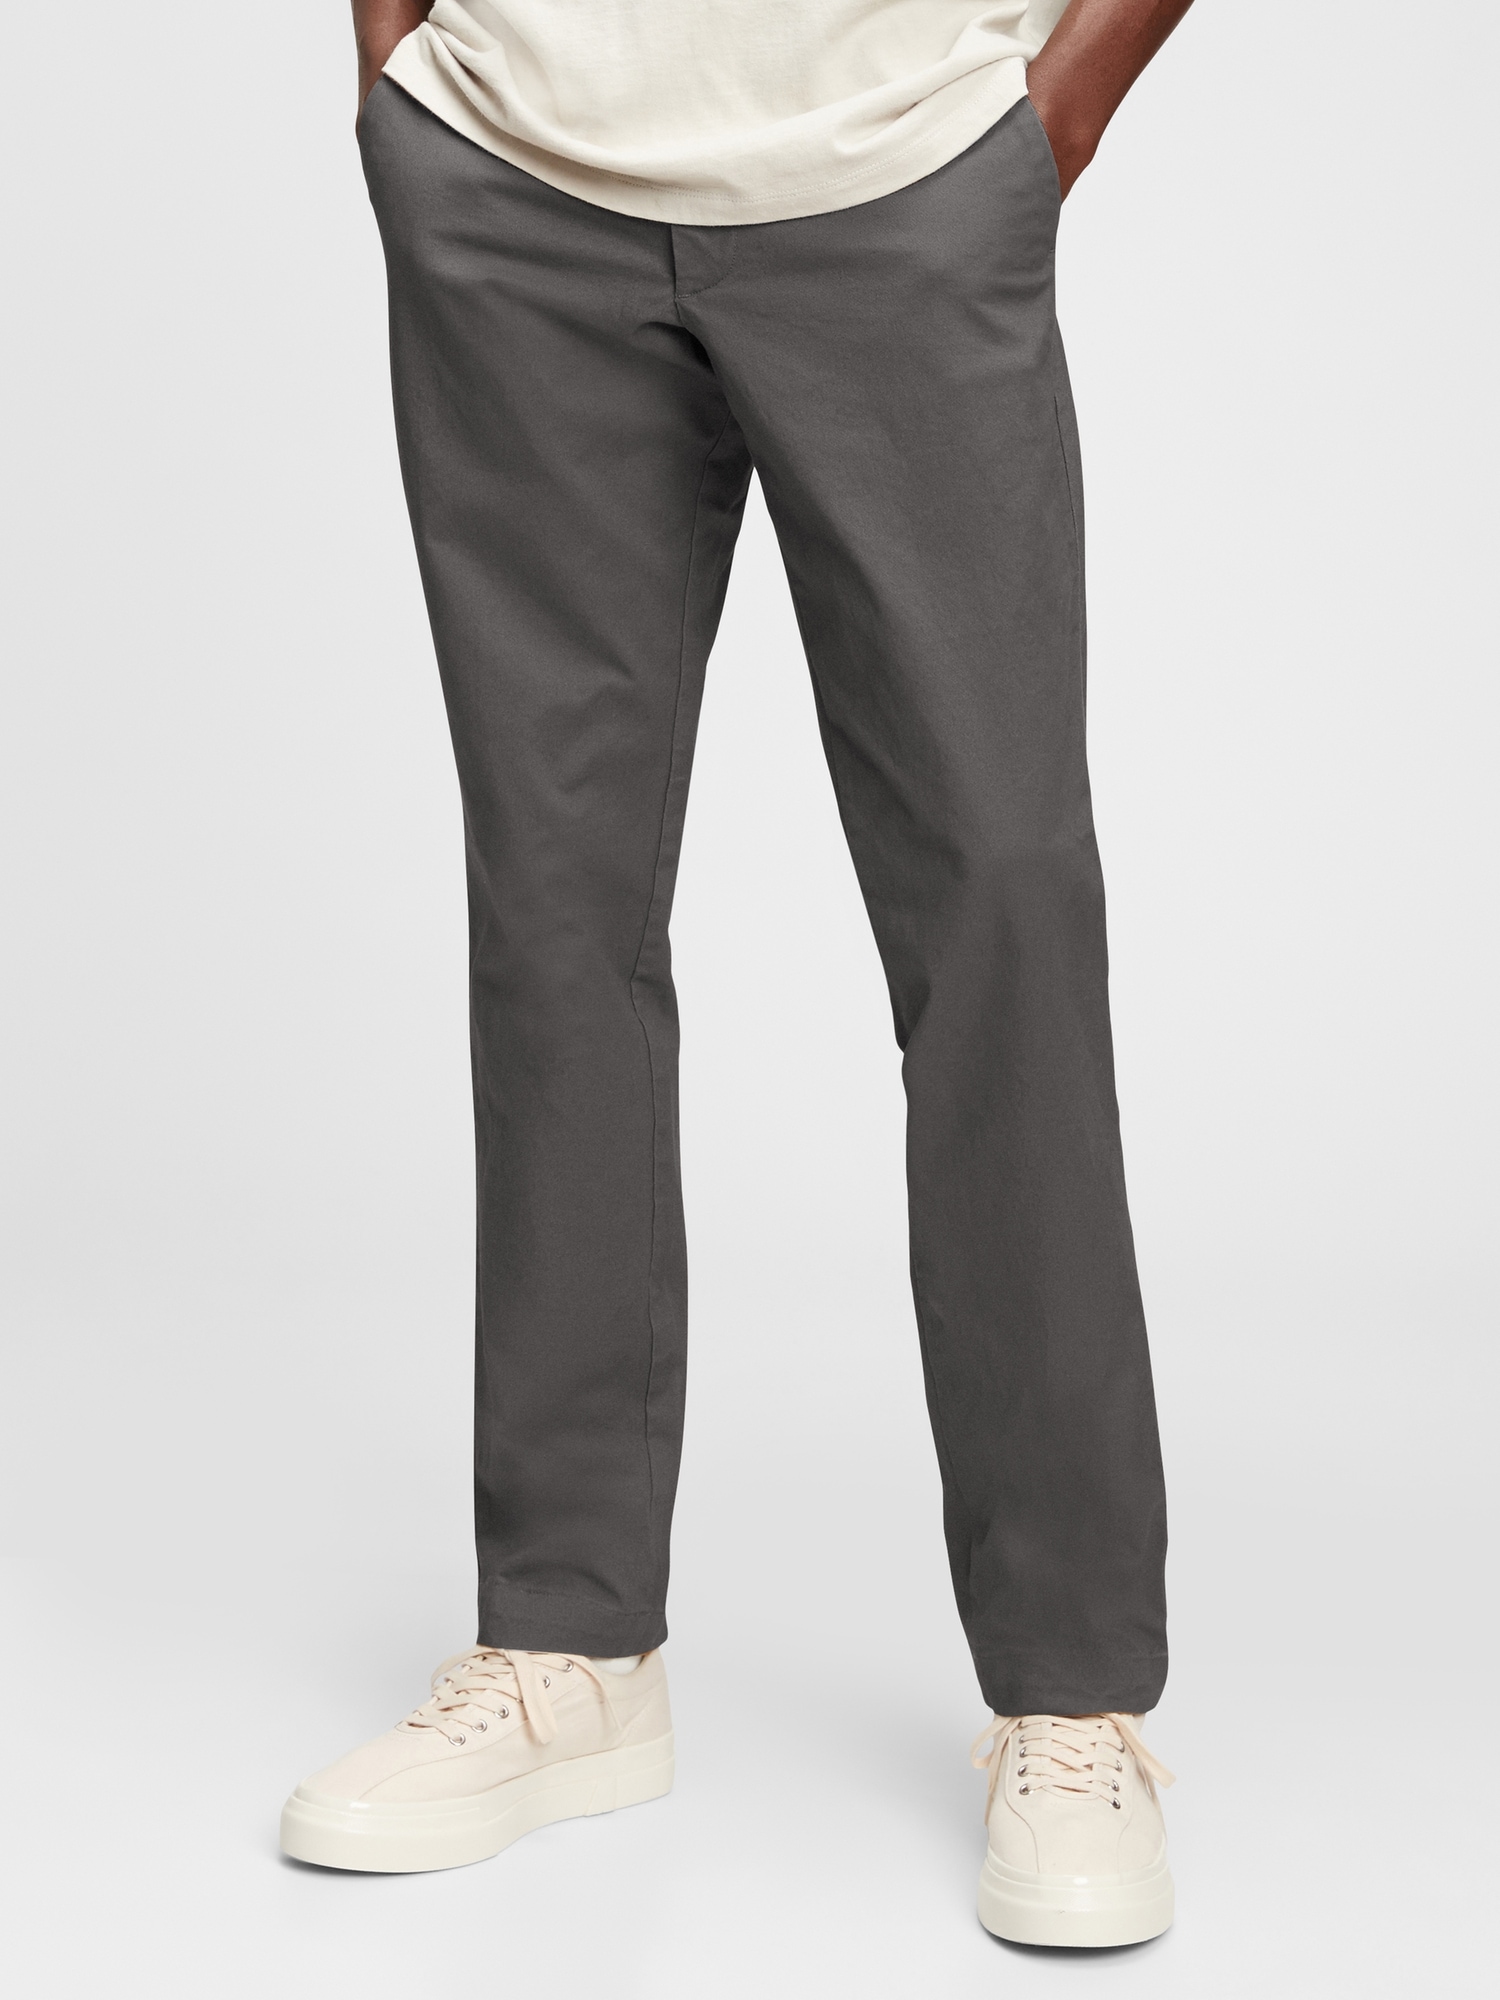 Gap Men's Modern Khakis In Athletic Taper With Gapflex Soft Black Size 30w  32l from Gap on 21 Buttons